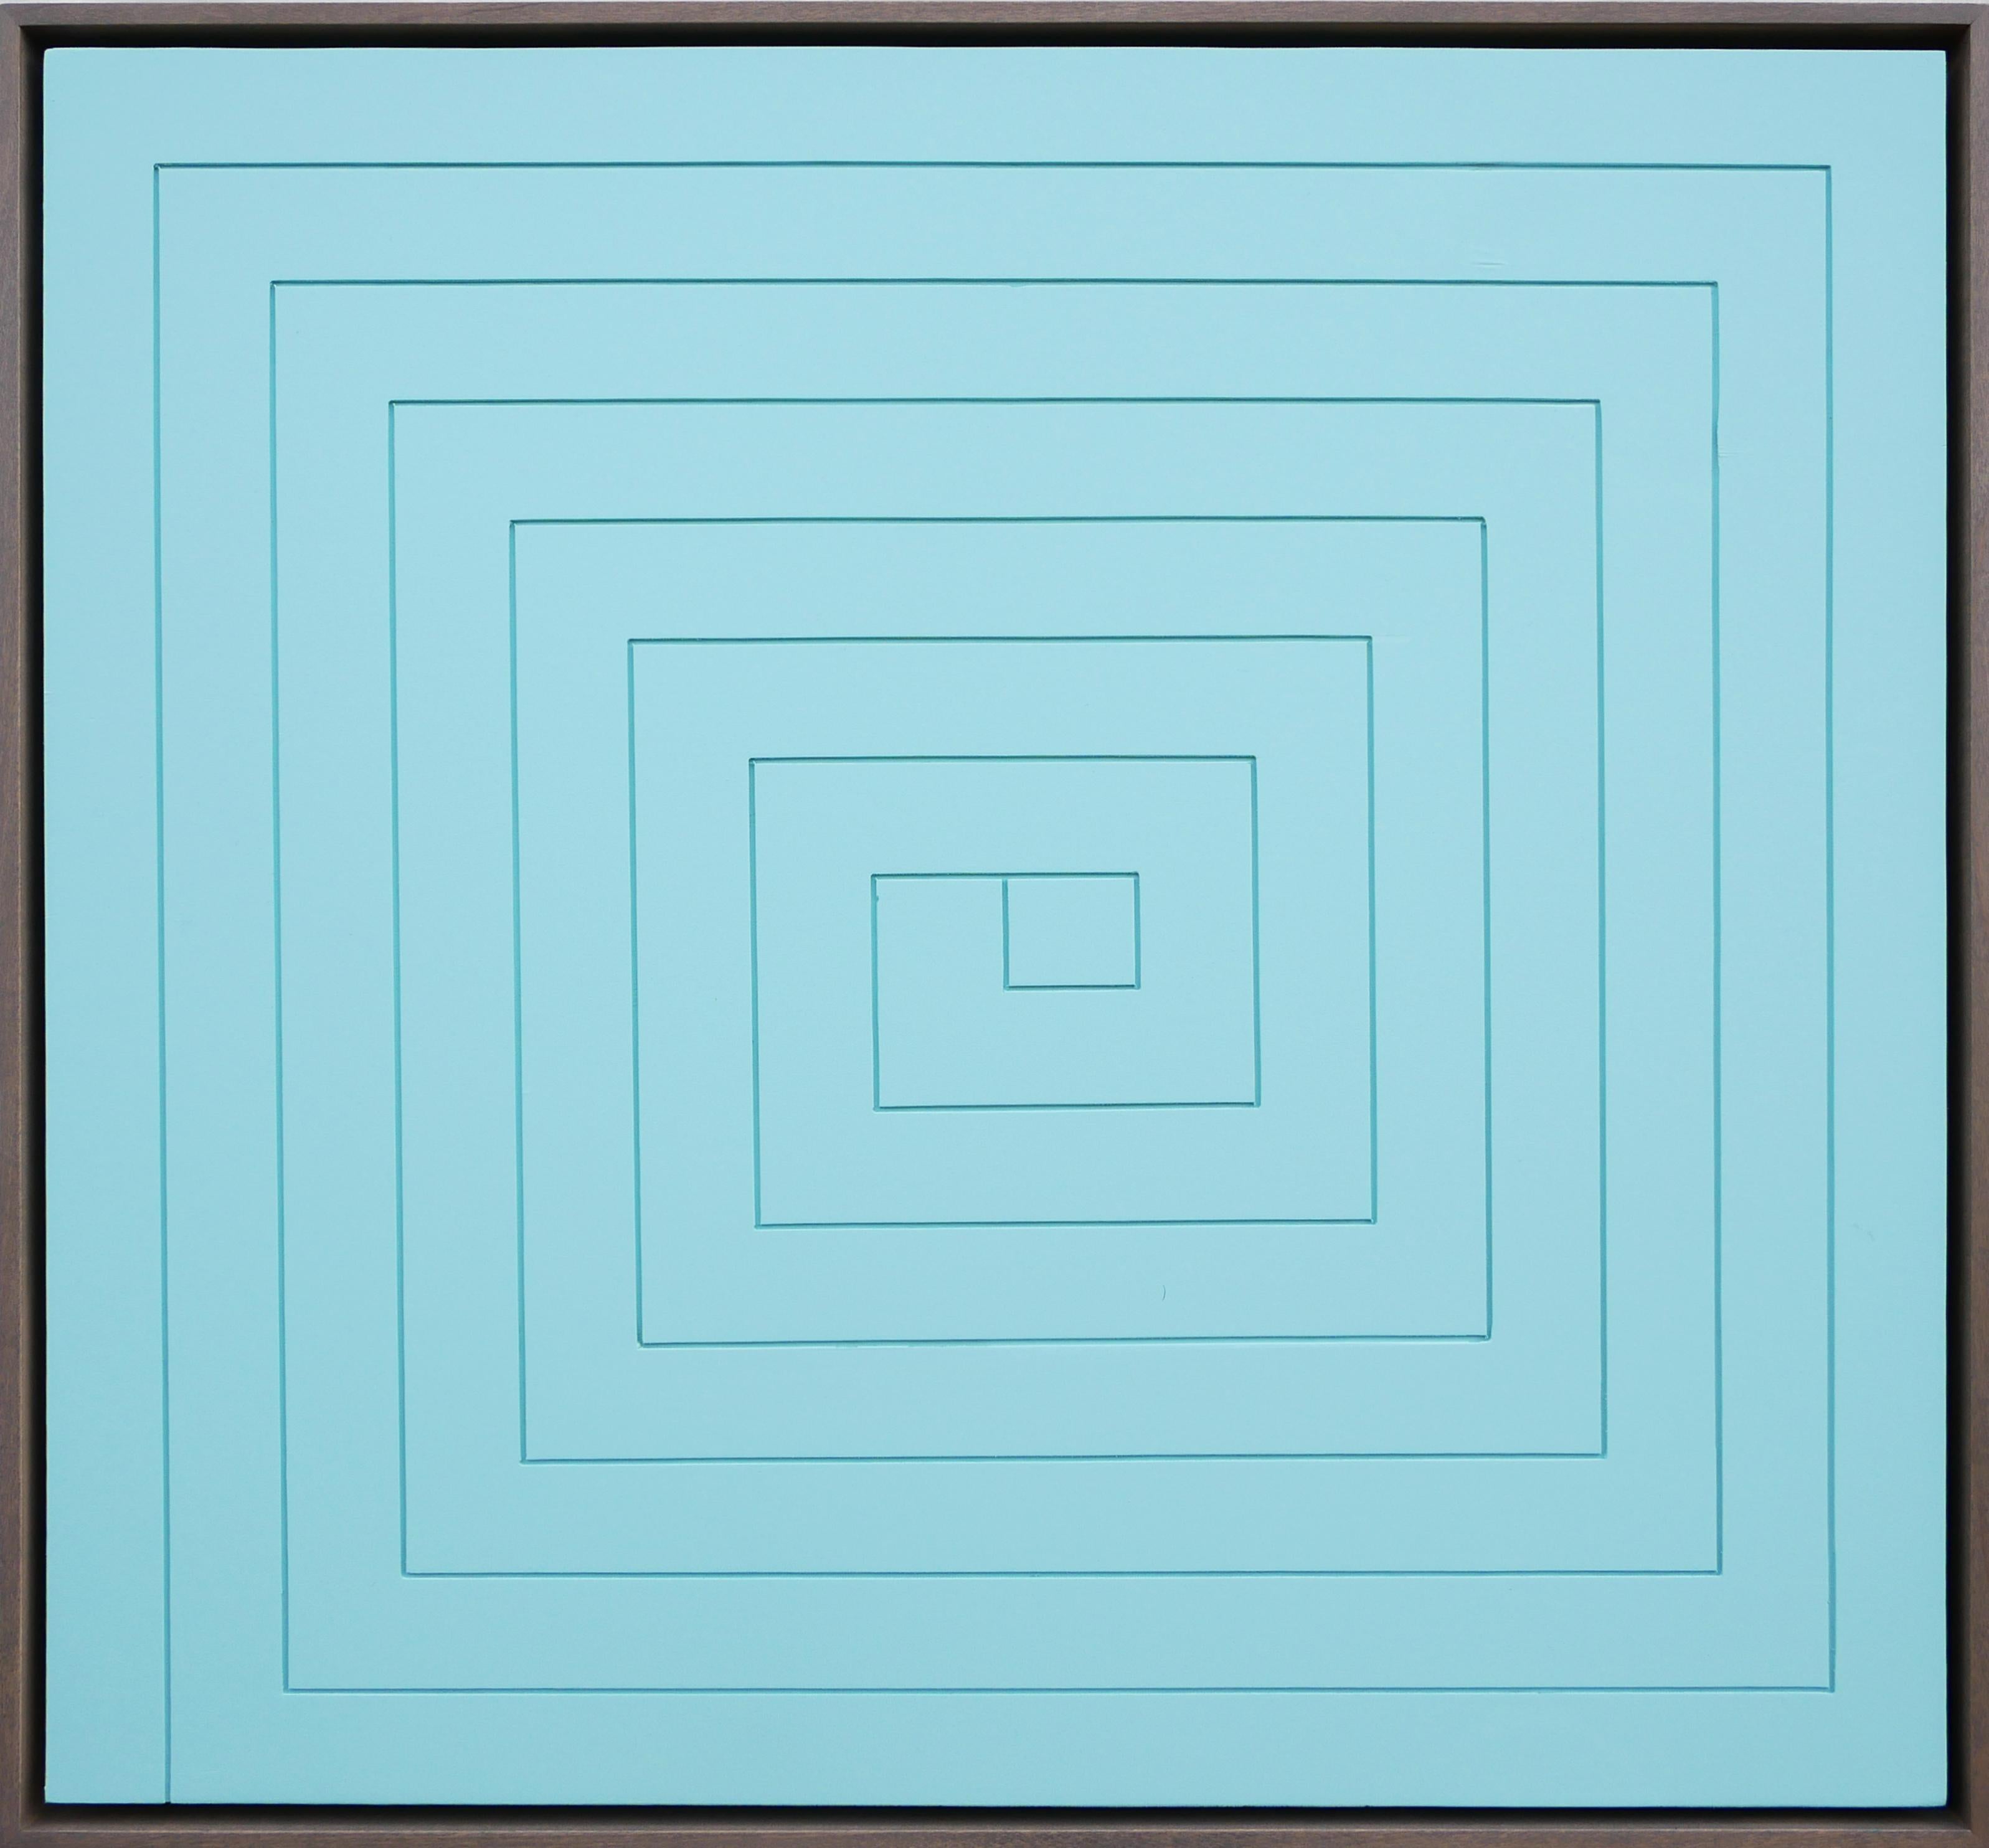 Matthew Reeves Abstract Sculpture - "Entrapment" Contemporary Pastel Sky Blue Linear Abstract Groove Painting 